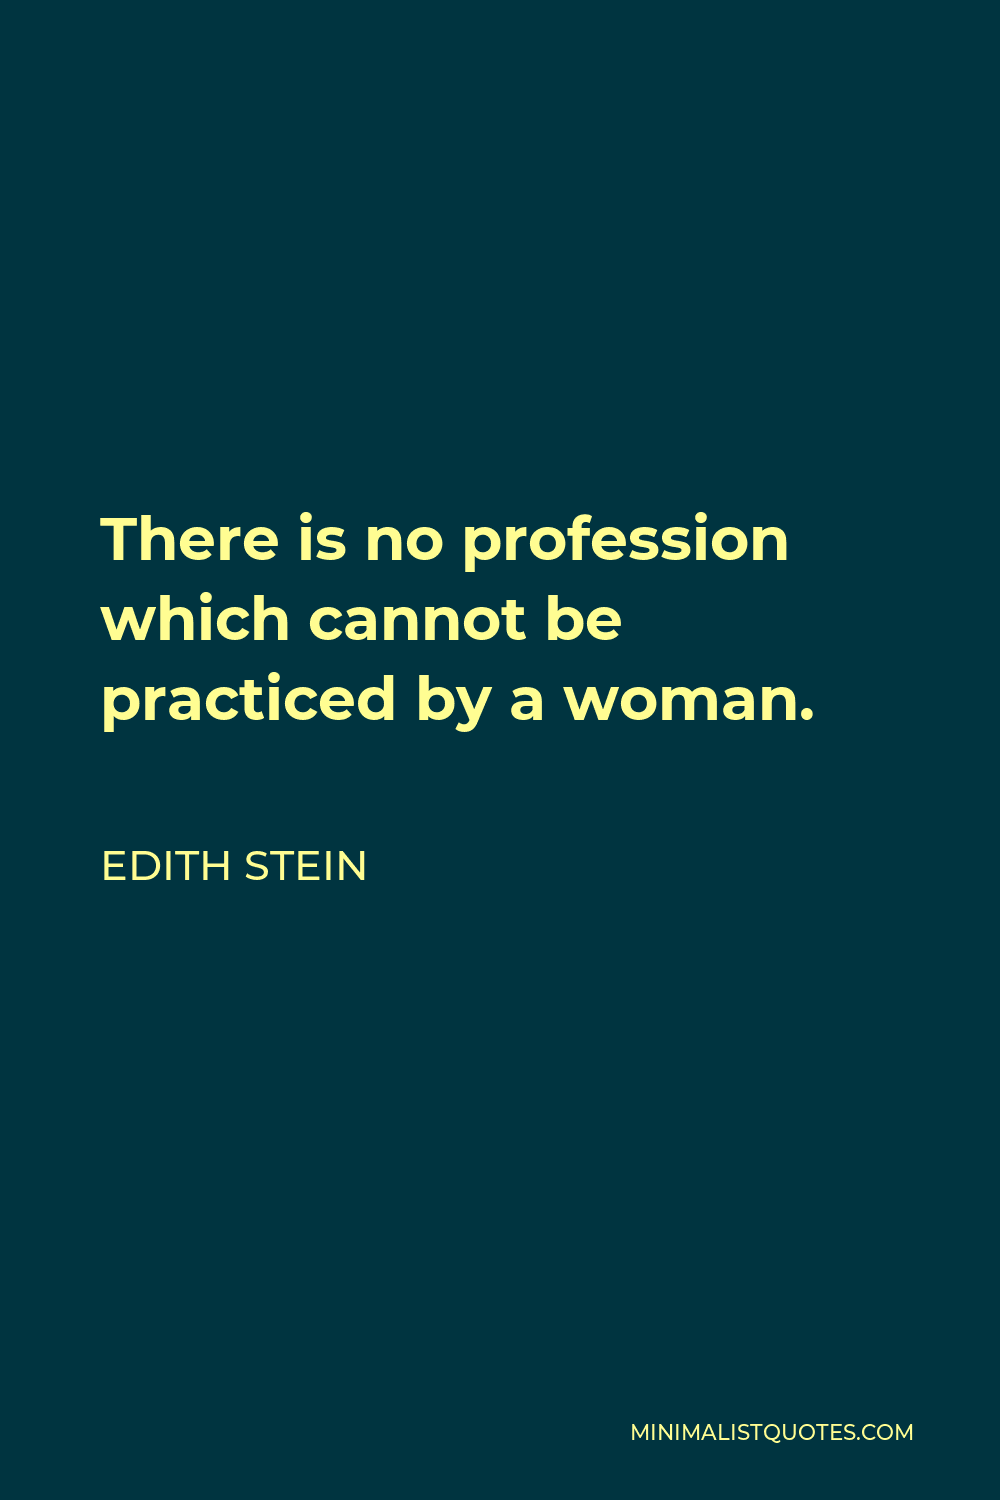 Edith Stein Quote - There is no profession which cannot be practiced by a woman.